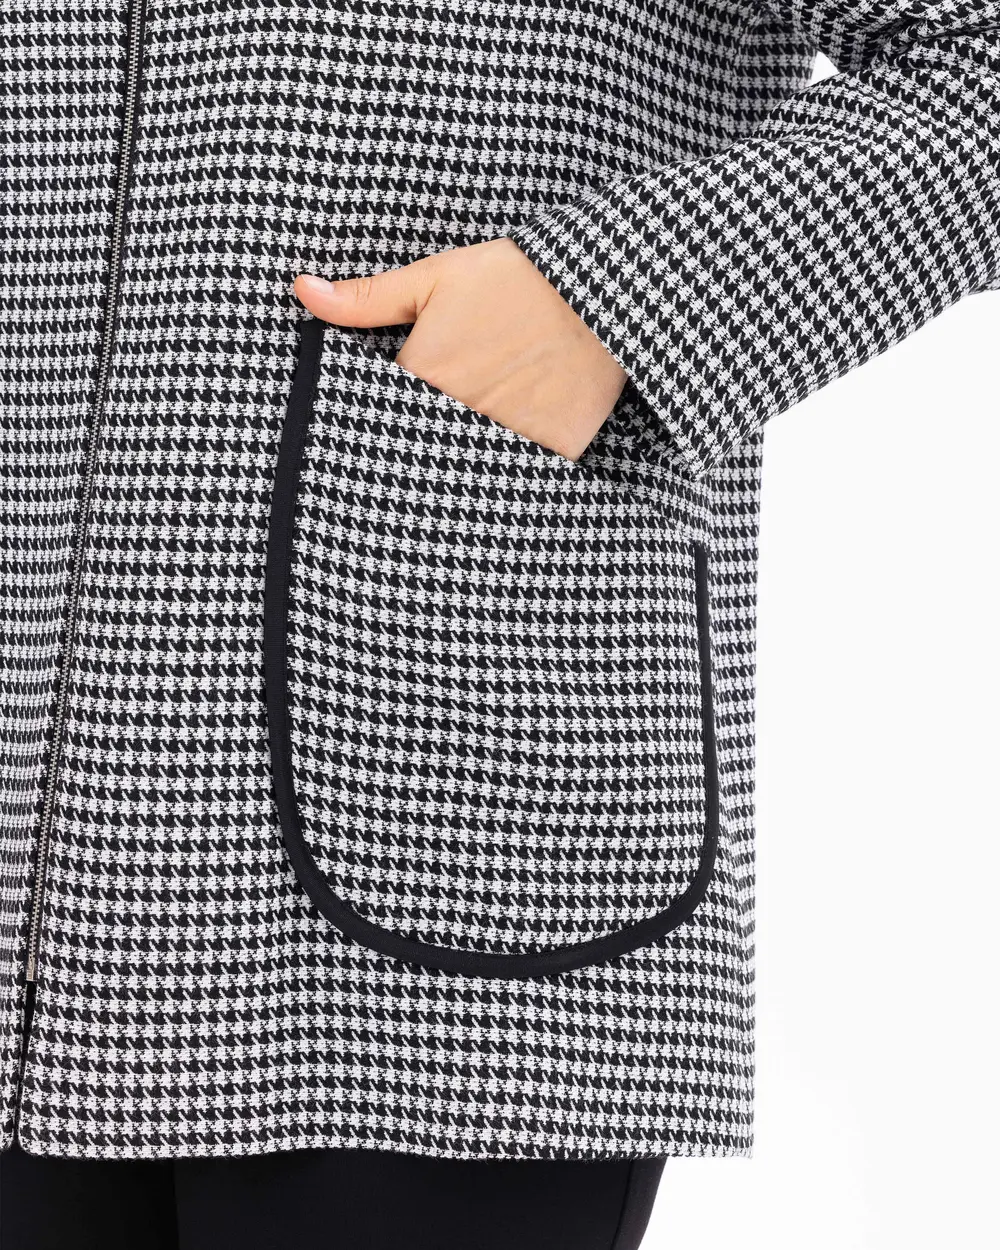 Plus Size Houndstooth Patterned Hooded Jacket